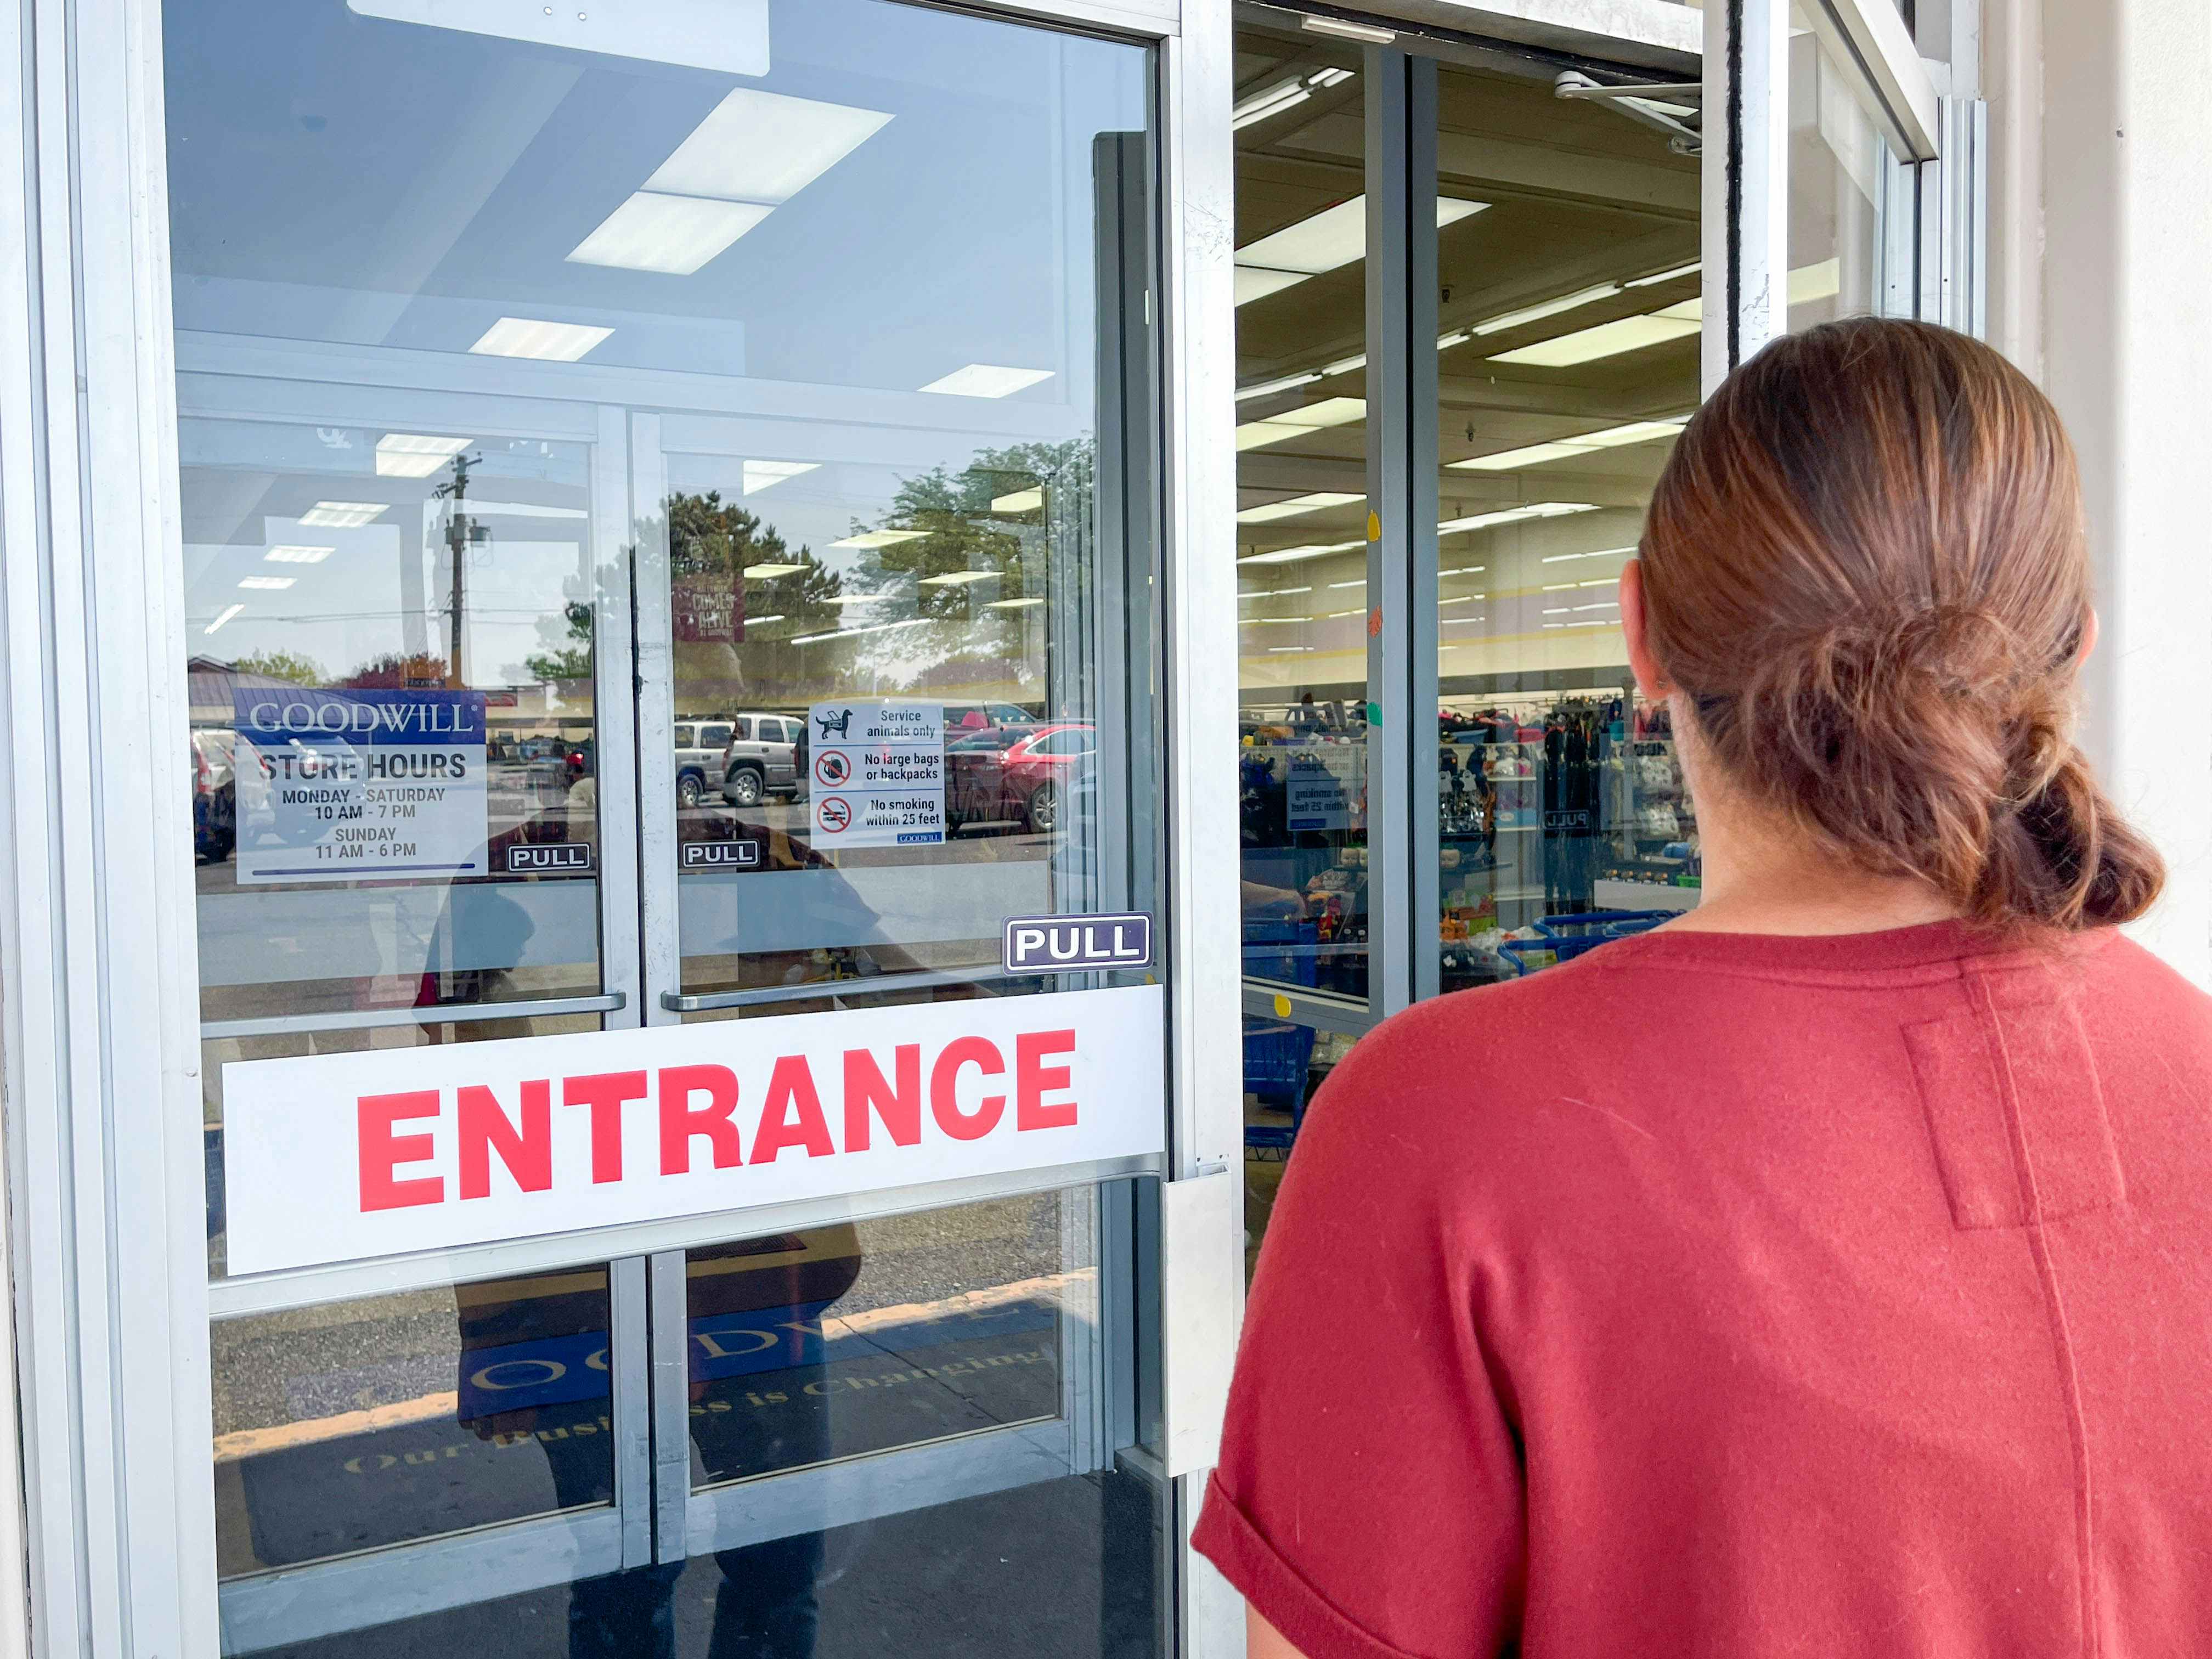 a woman going into entrance of goodwill